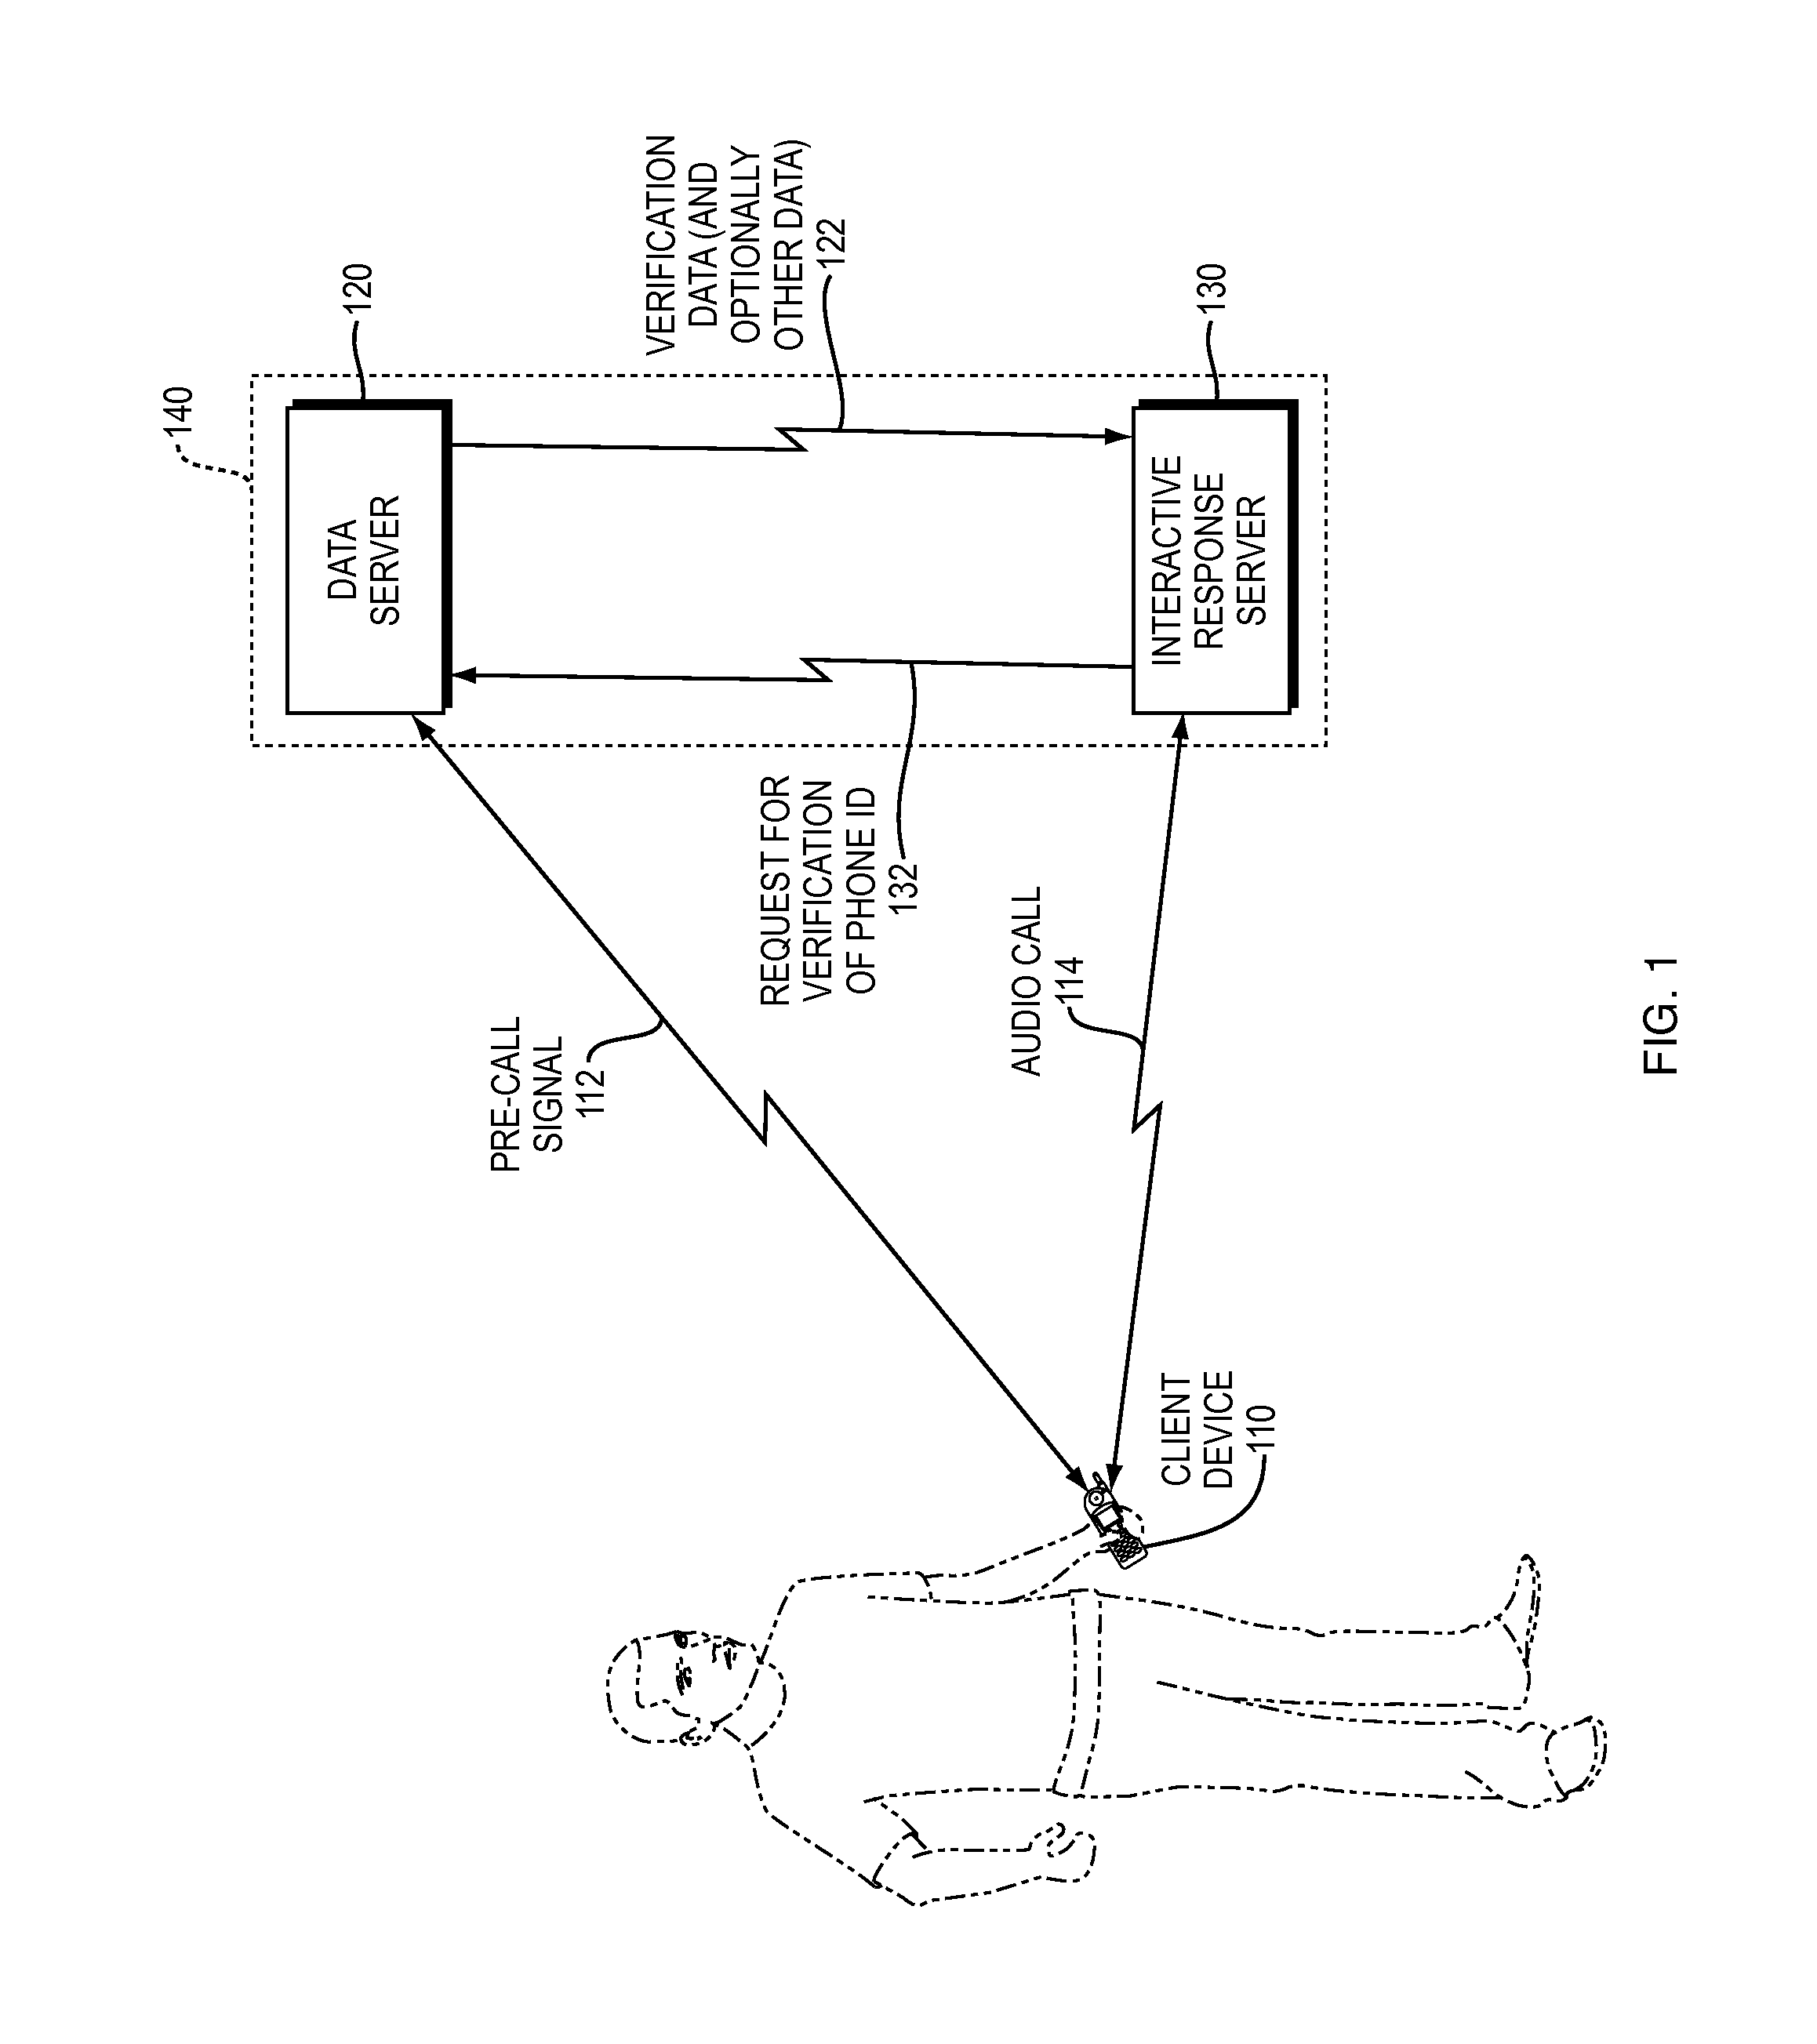 Method and Apparatus for Providing Enhanced Communications